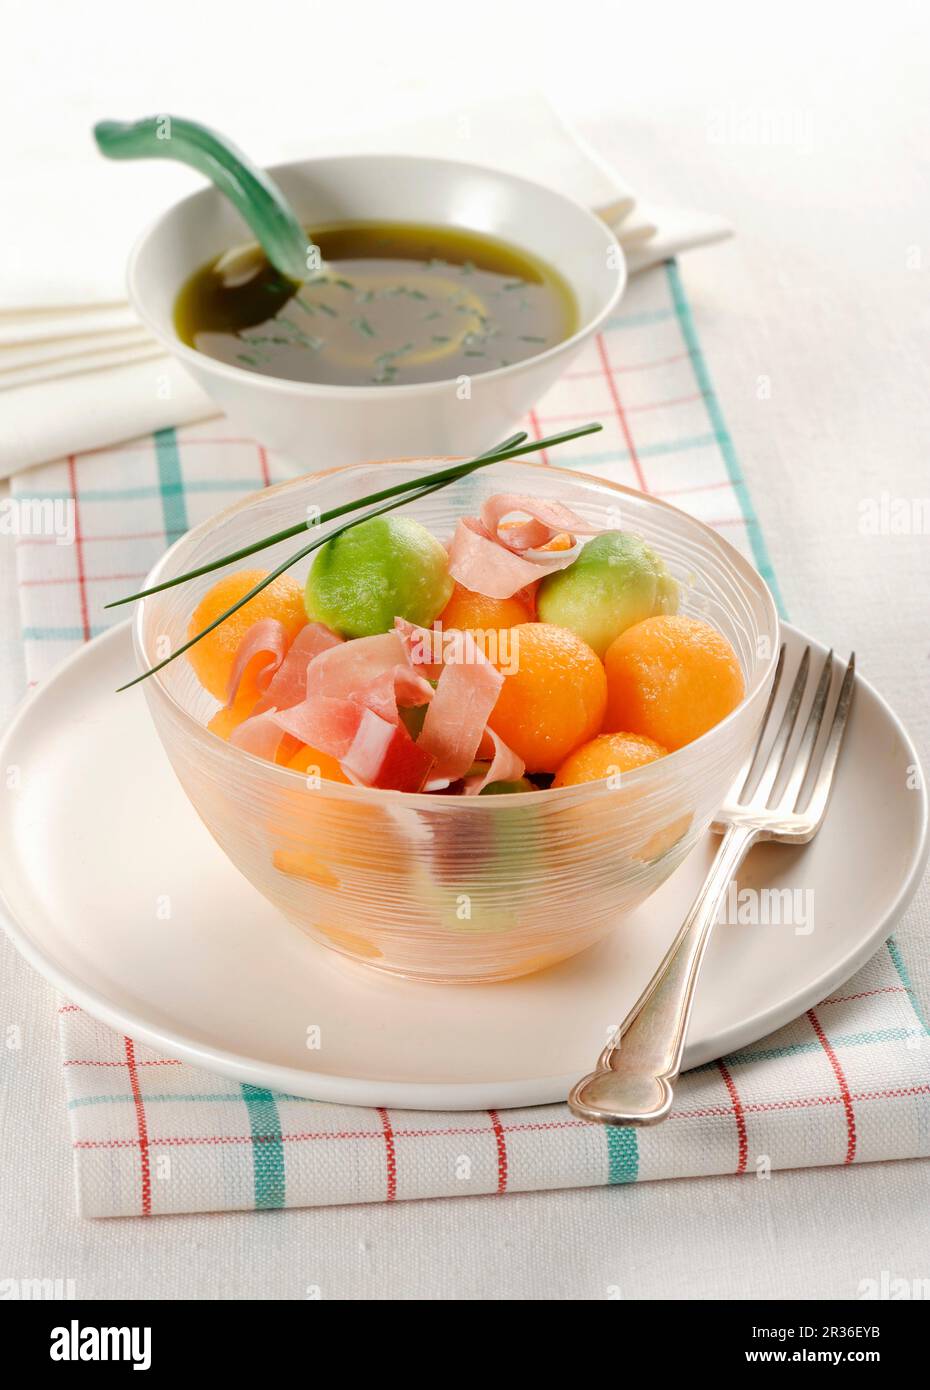 Avocado and salad with strips of ham Stock Photo